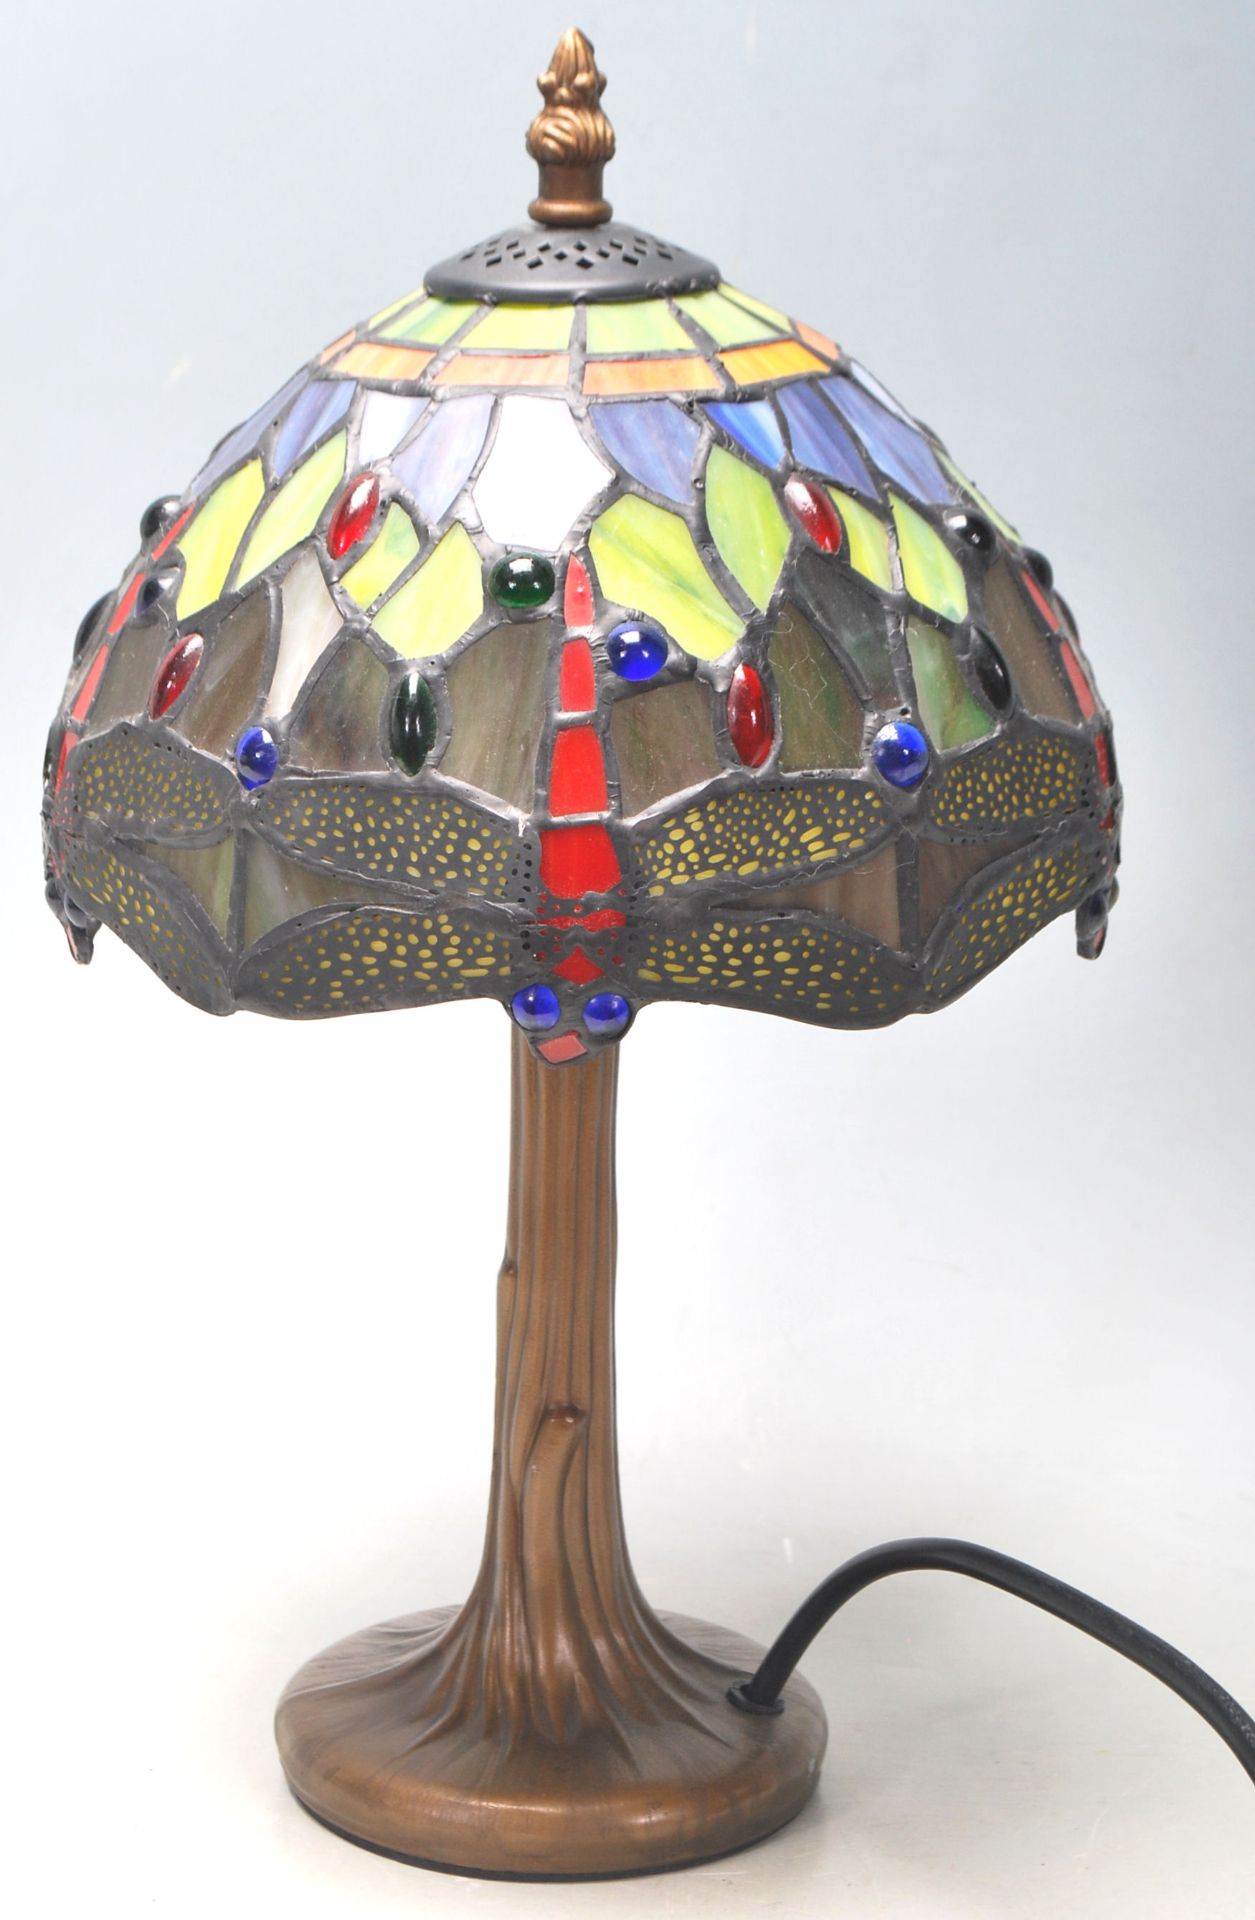 A contemporary antique style antique Tiffany lamp having a round gilt base with a leaded coloured